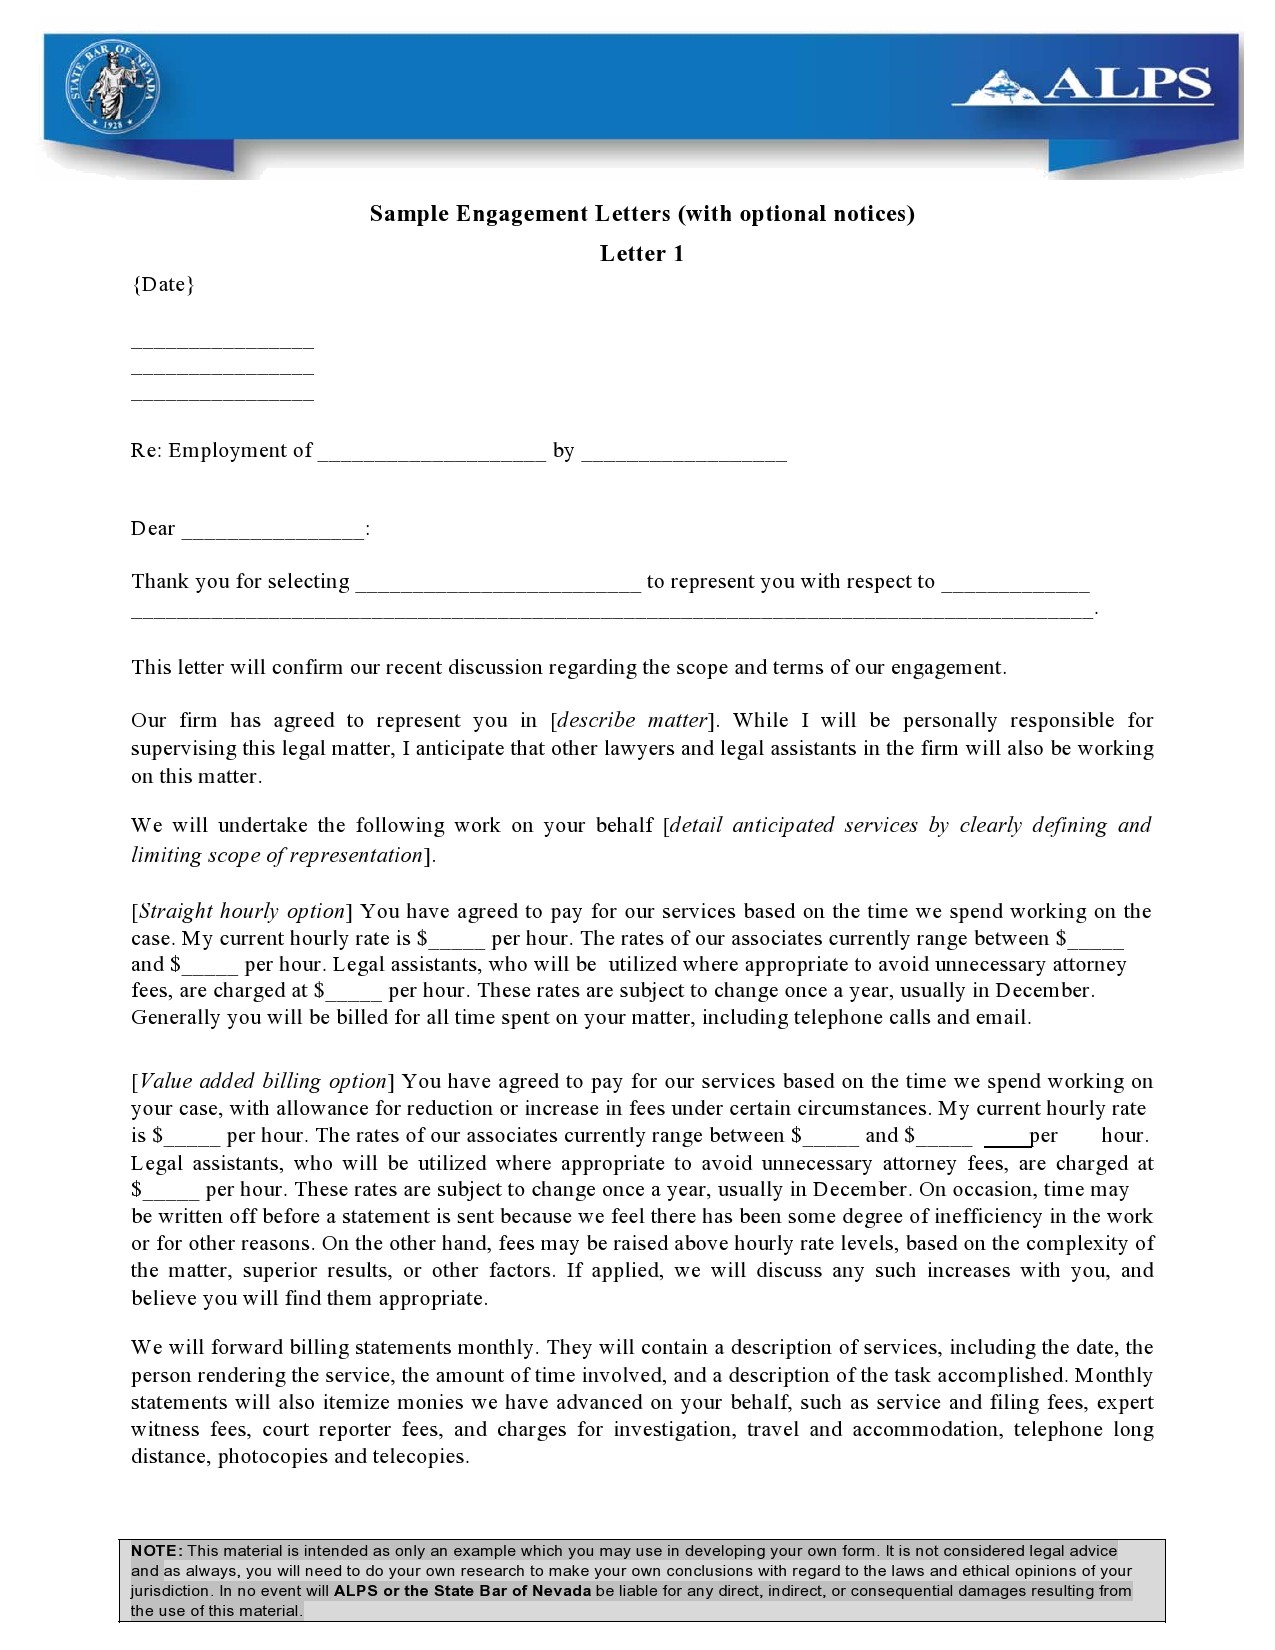 Free engagement letter 02